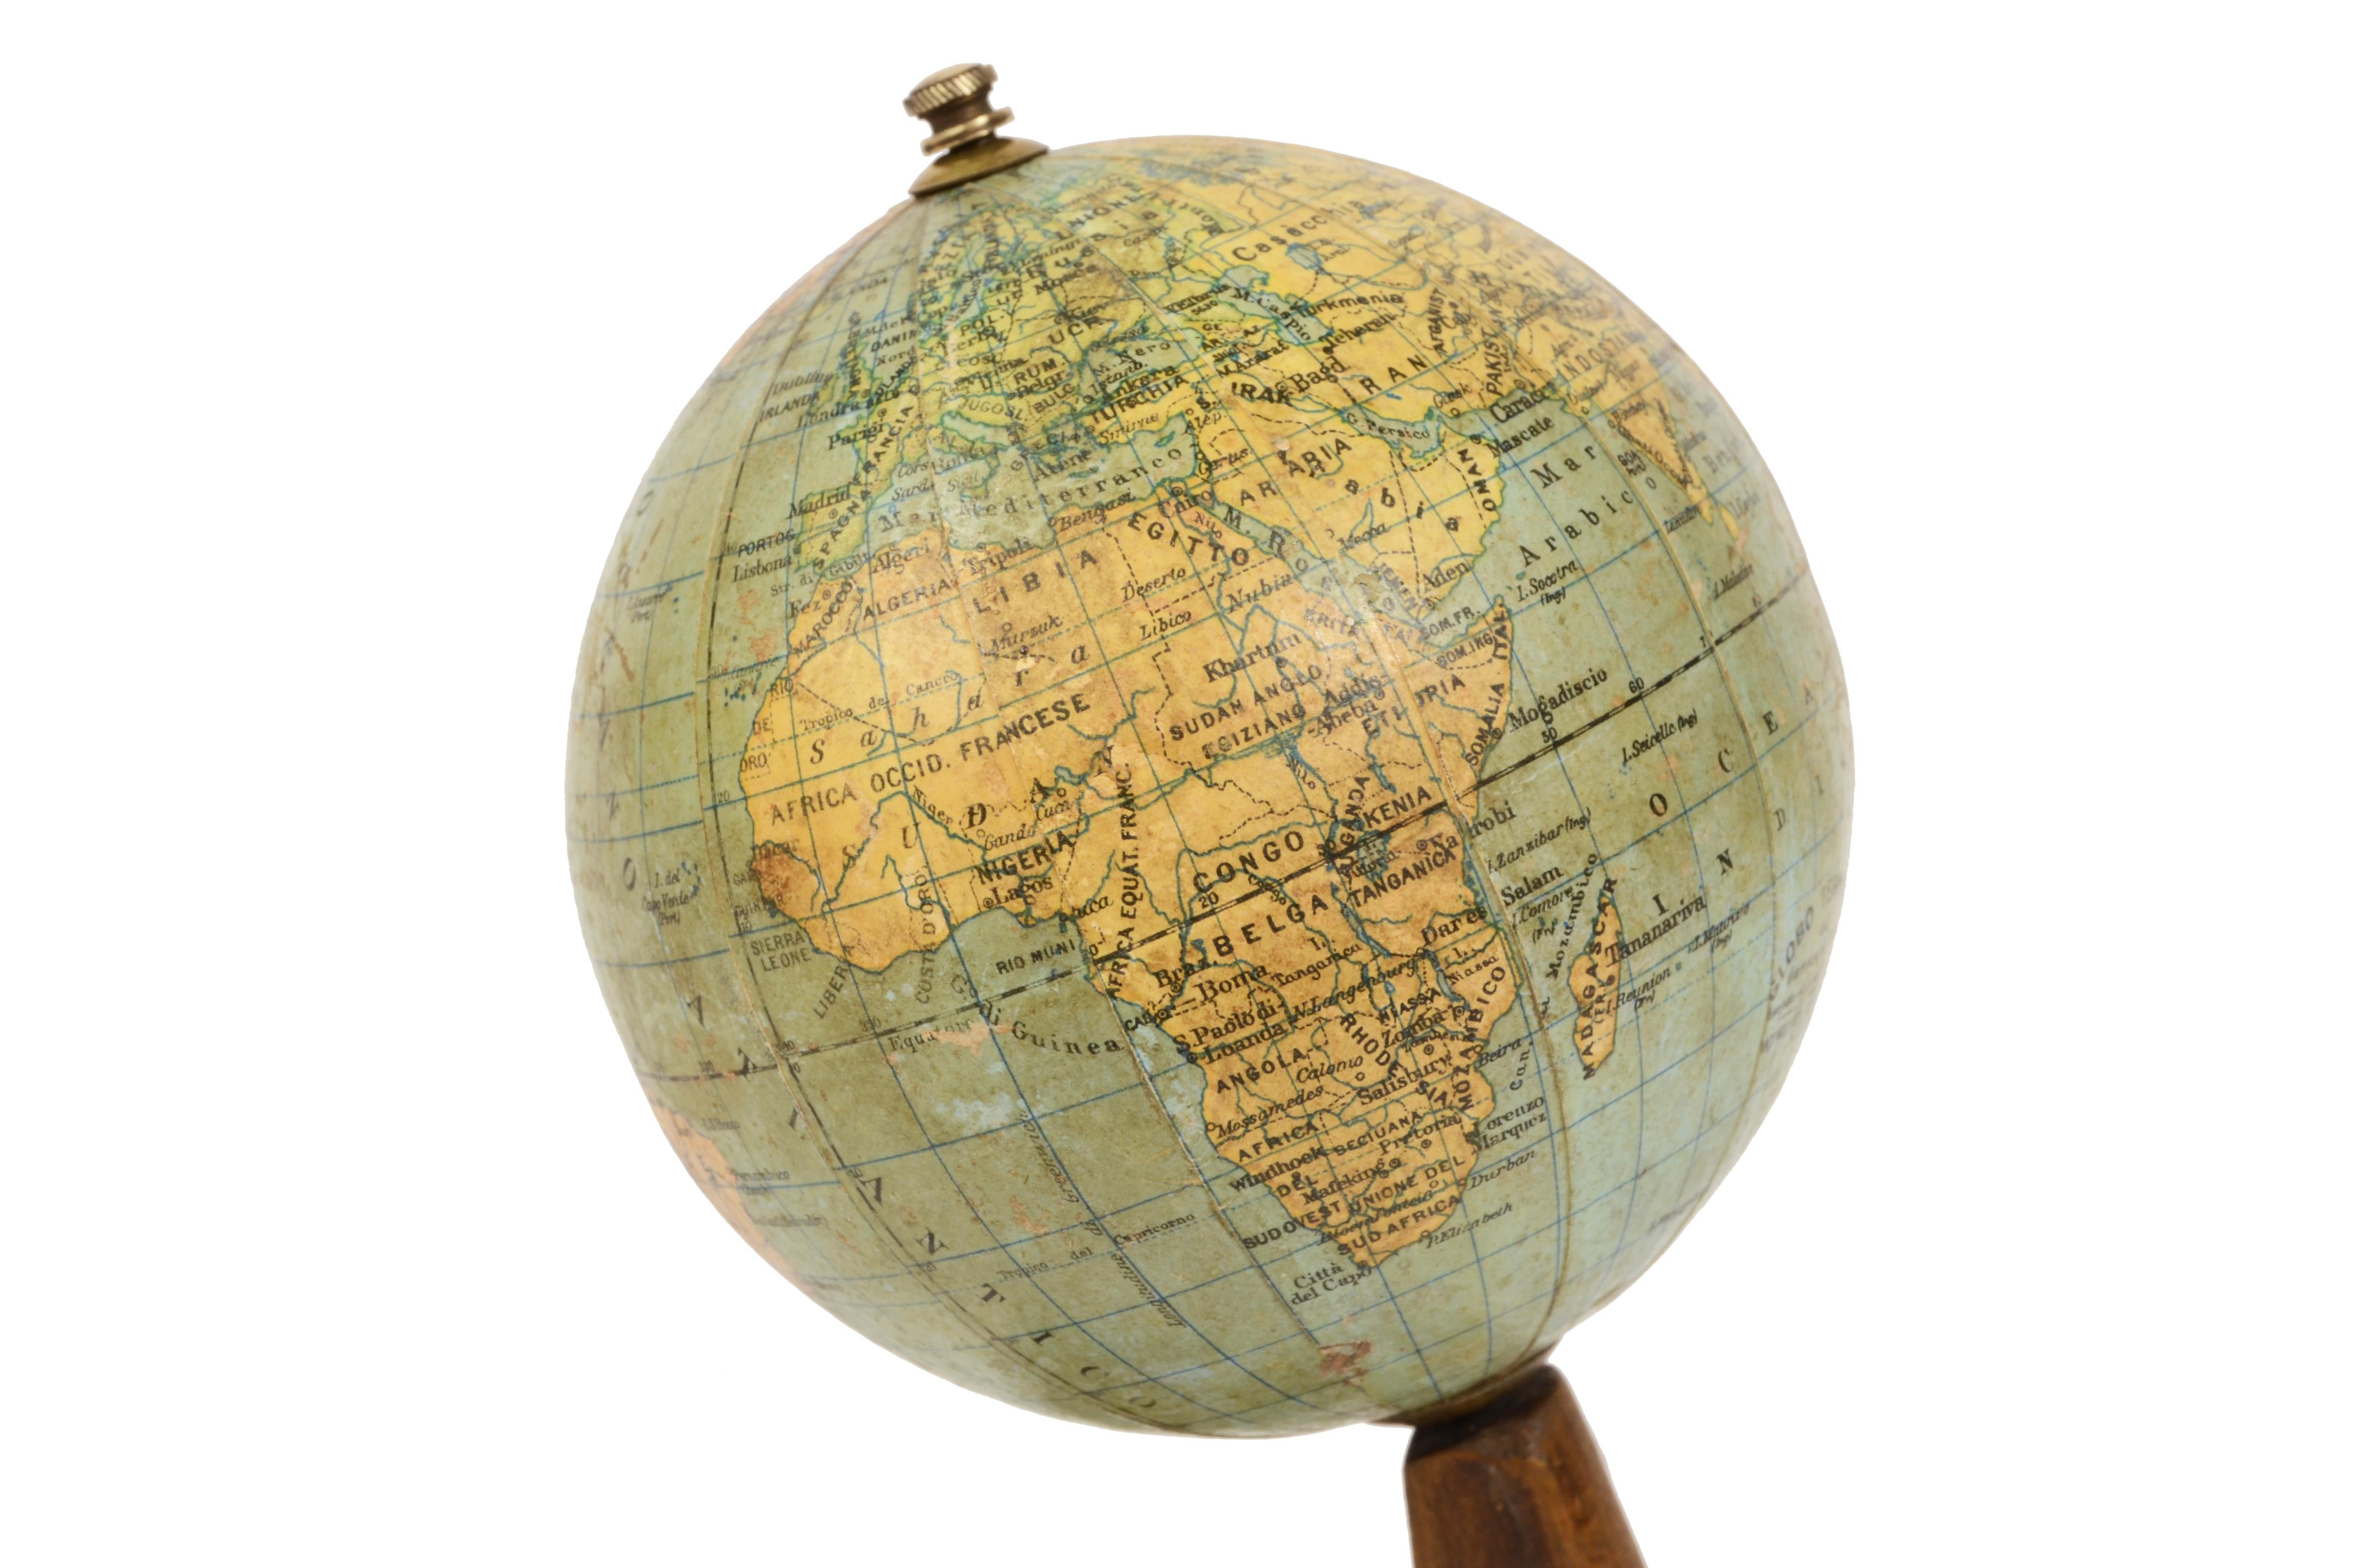 Small and rare terrestrial globe by Vallardi in Milan publisher designed by and engraved by A. Minelli in the thirties. 
Wooden base and papier-mâché sphere. 
Measures: height 19 cm, inches 7.5, sphere diameter 10 cm., inches 3.95. Good